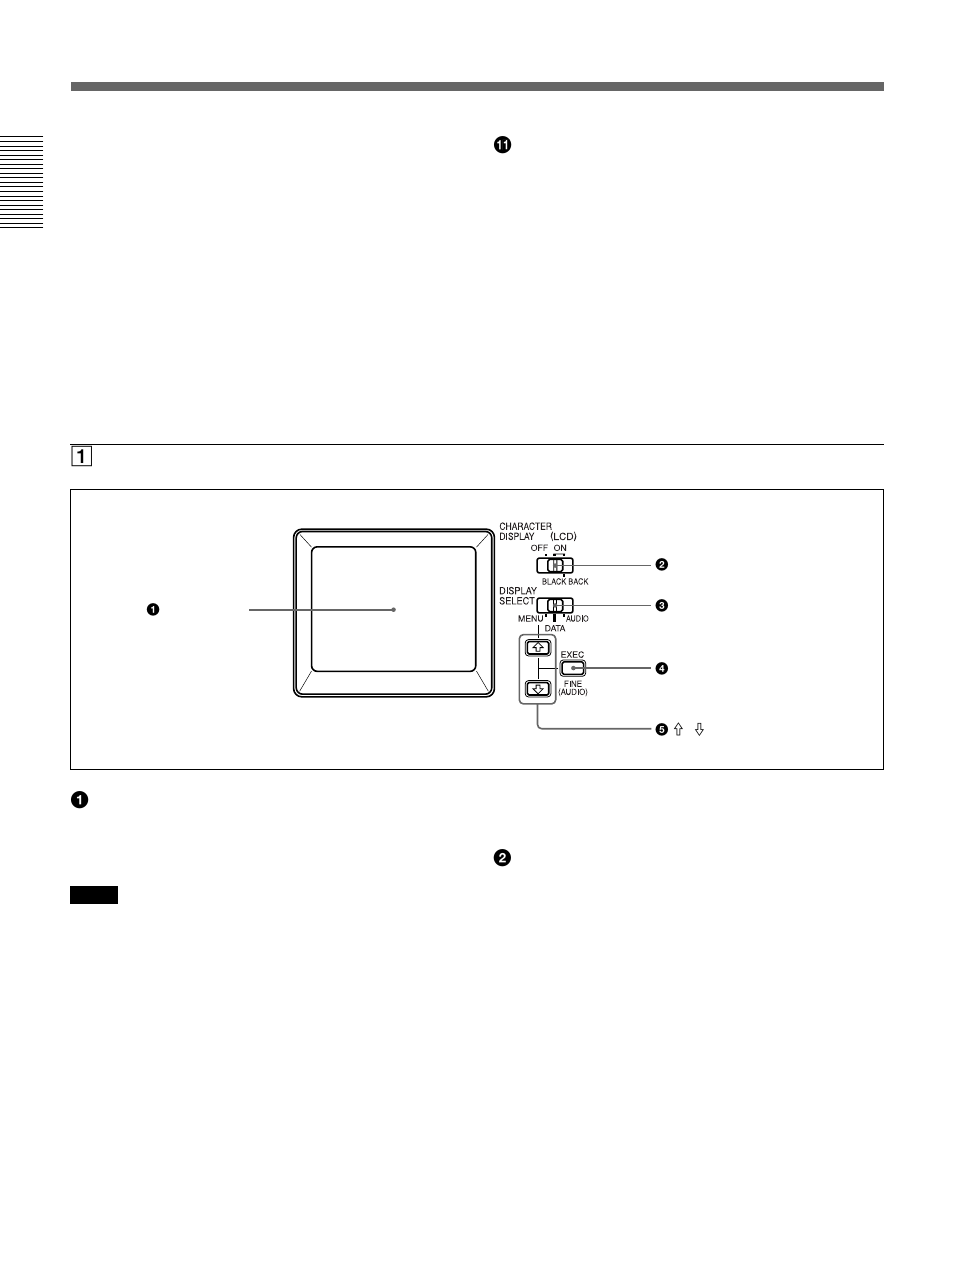 Location and function of parts | Sony DSR-45/45P Manuel d'utilisation | Page 14 / 220